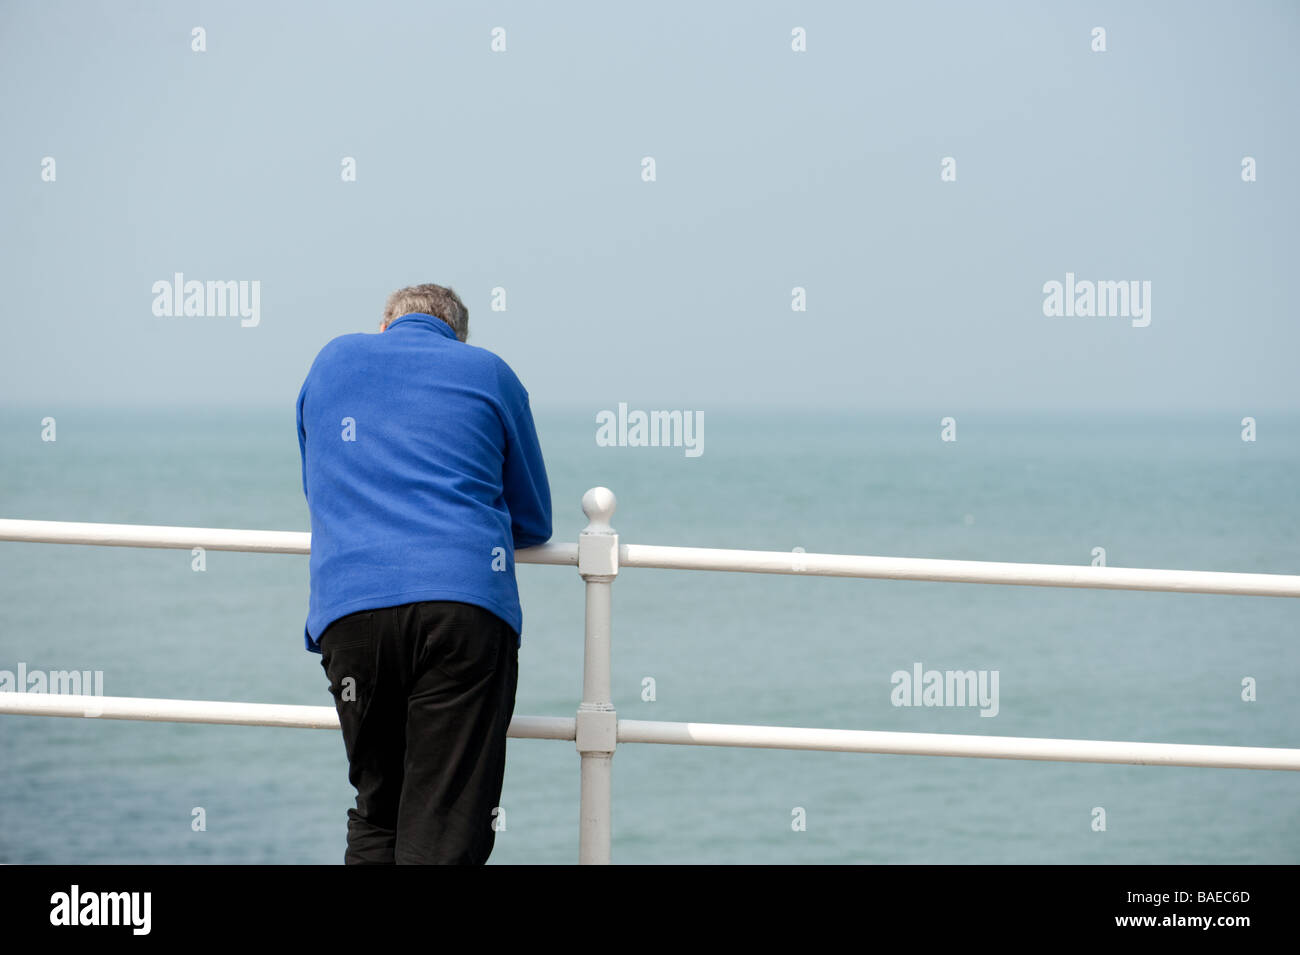 A middle aged man wearing a blue jacket leaning on the railings on the promenade at Aberystwyth wales UK, summer afternoon Stock Photo